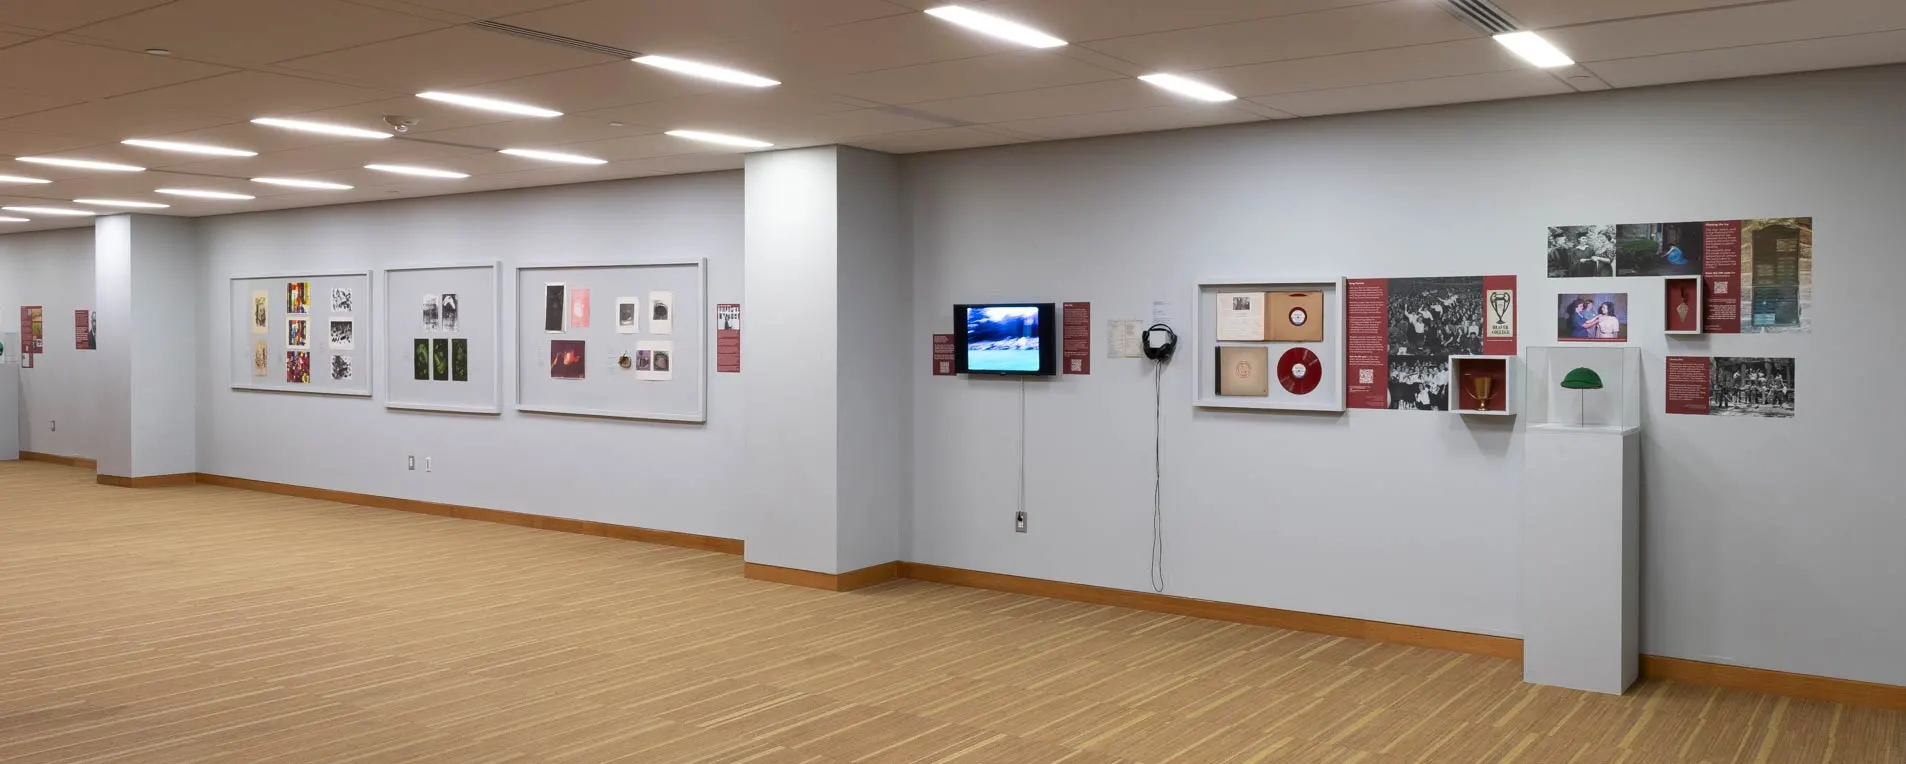 Installation view, "Arcadia Collects: Art, Objects + Ephemera from the University Archives, Rosedale Gallery, University Commons, photo: Sam Fritch